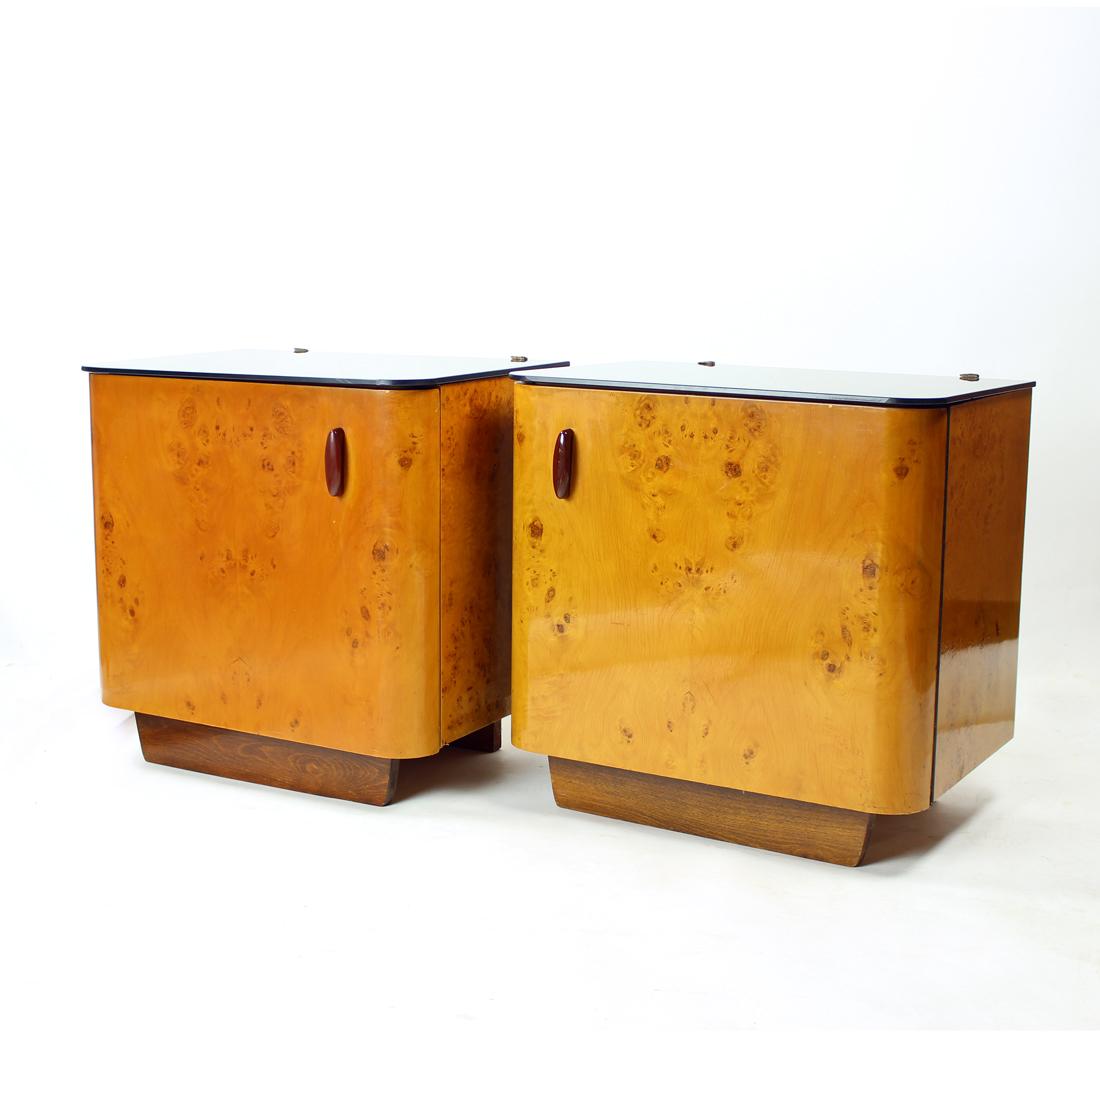 Set of Two Bedside Tables in Wood & Glass, Czechoslovakia, 1940s For Sale 1